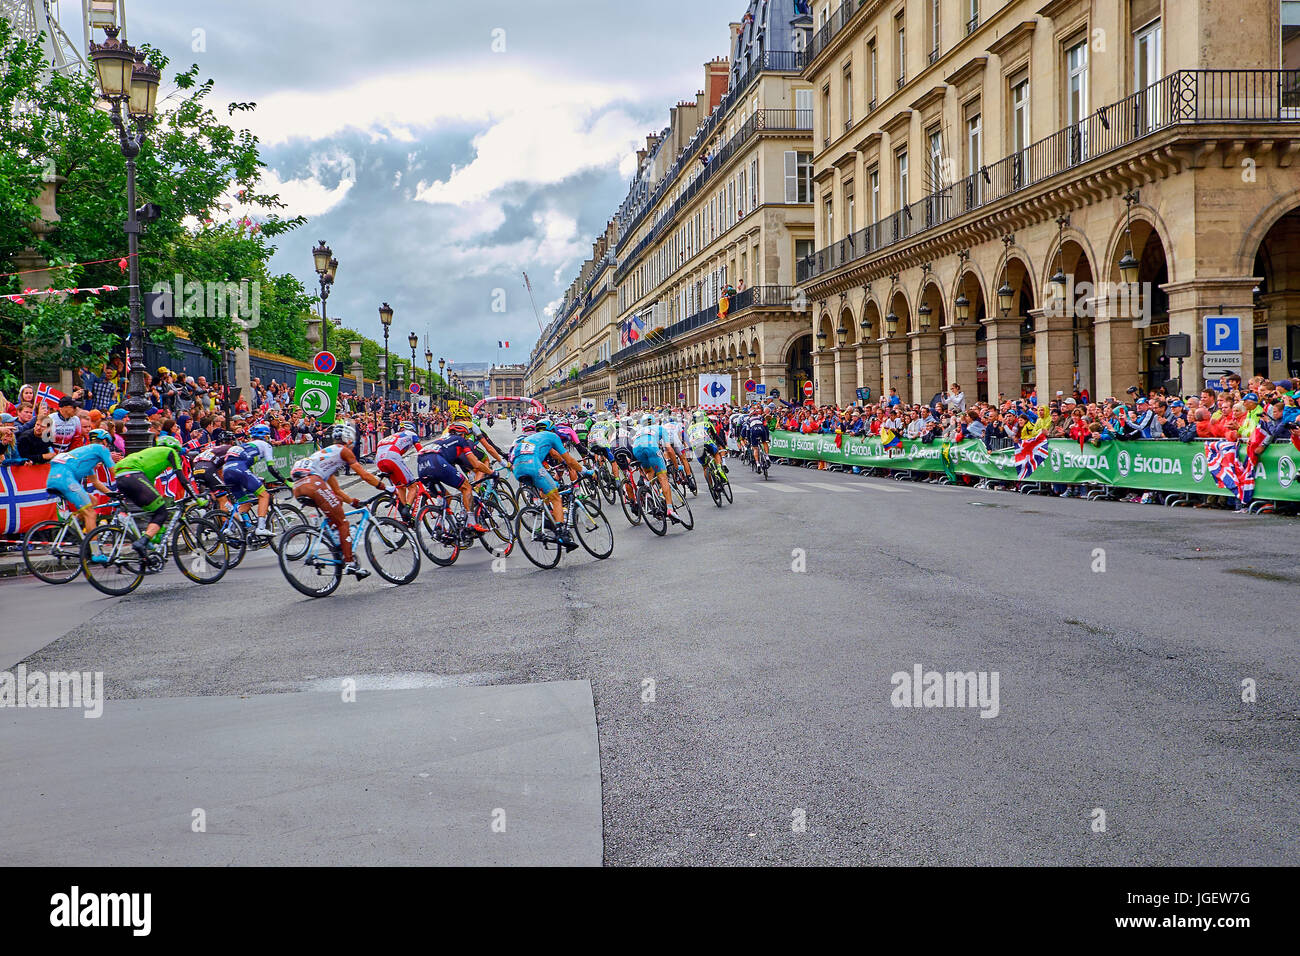 PARIS, FRANCE - JULY 26, 2015: the Tour de France peloton on the final stage on the roads around the tuileries in Paris Stock Photo